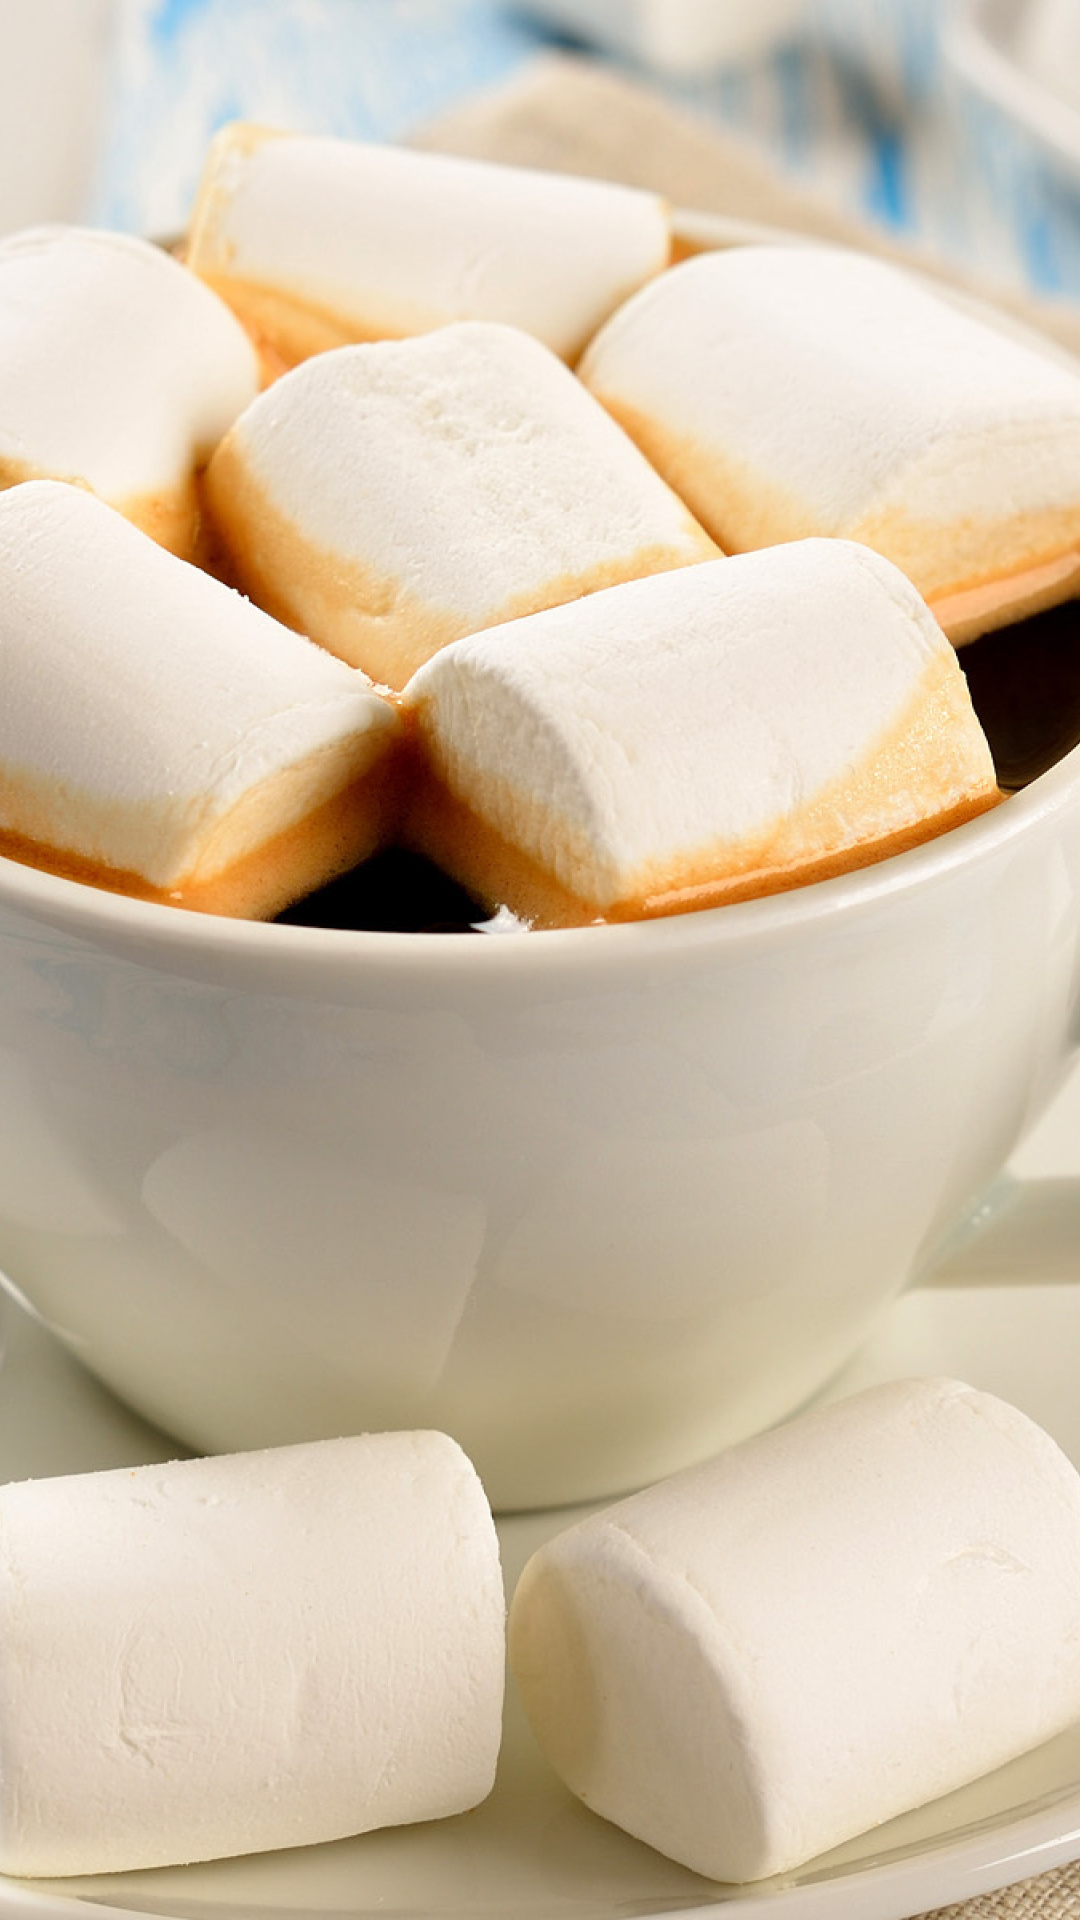 Marshmallow and Coffee wallpaper 1080x1920